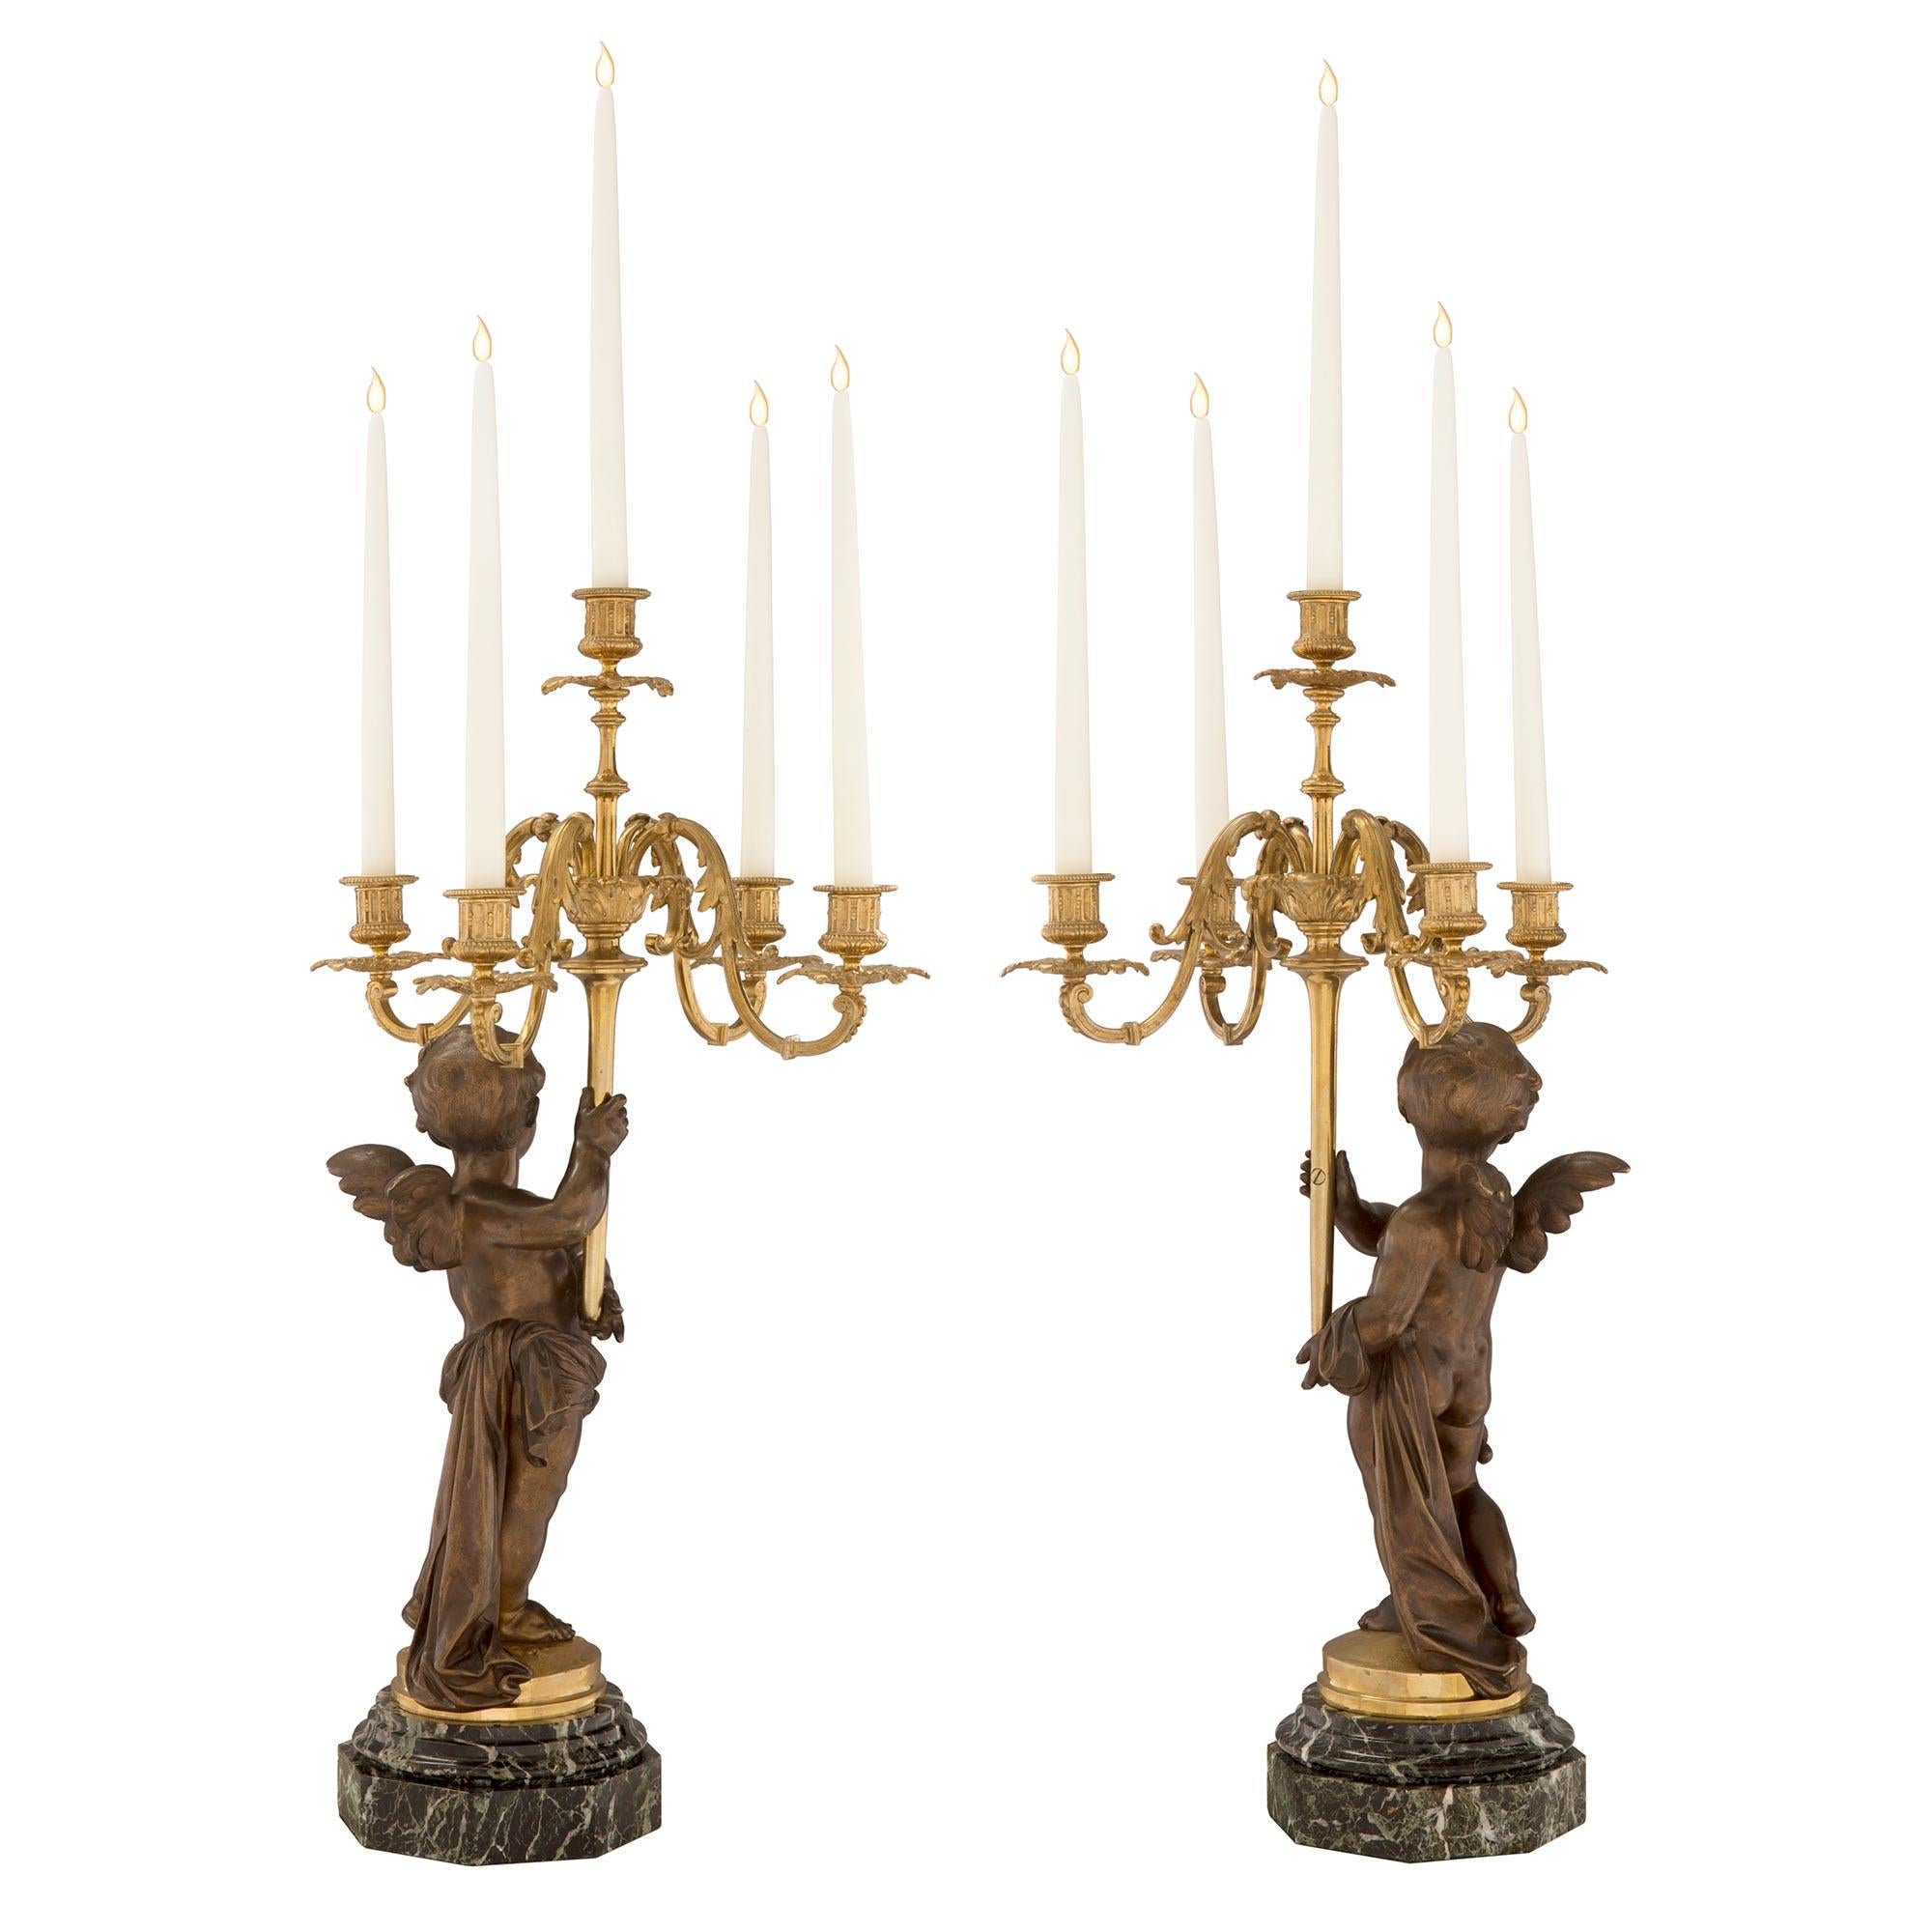 Patinated Pair of French 19th Century Louis XVI Style Winged Cherub Candelabras For Sale